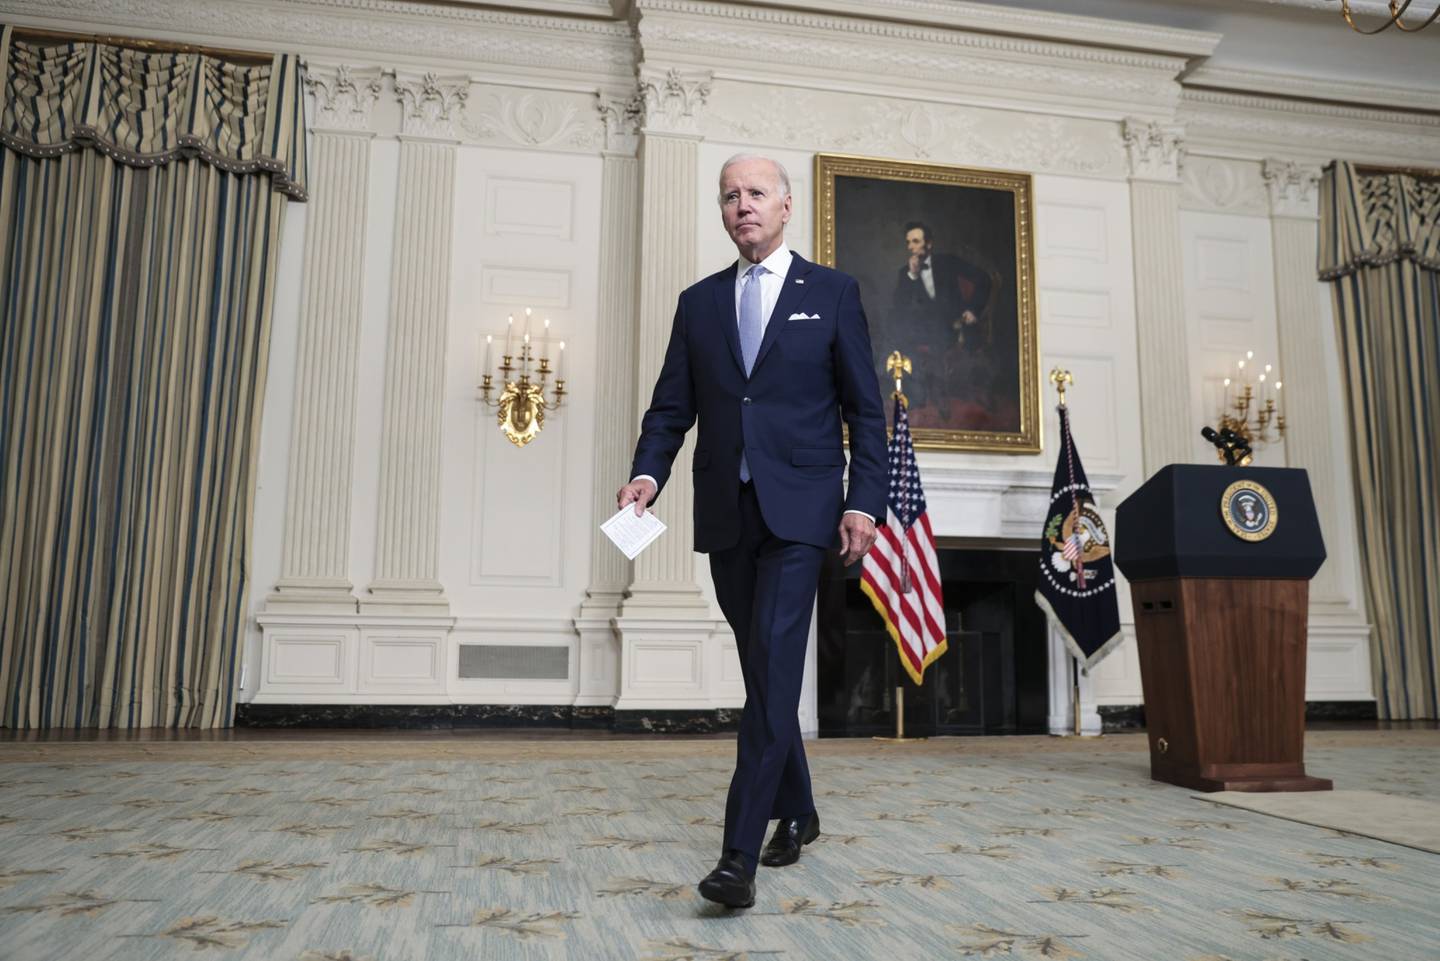 US President Joe Biden after a speech at the White House last month. Bloomberg